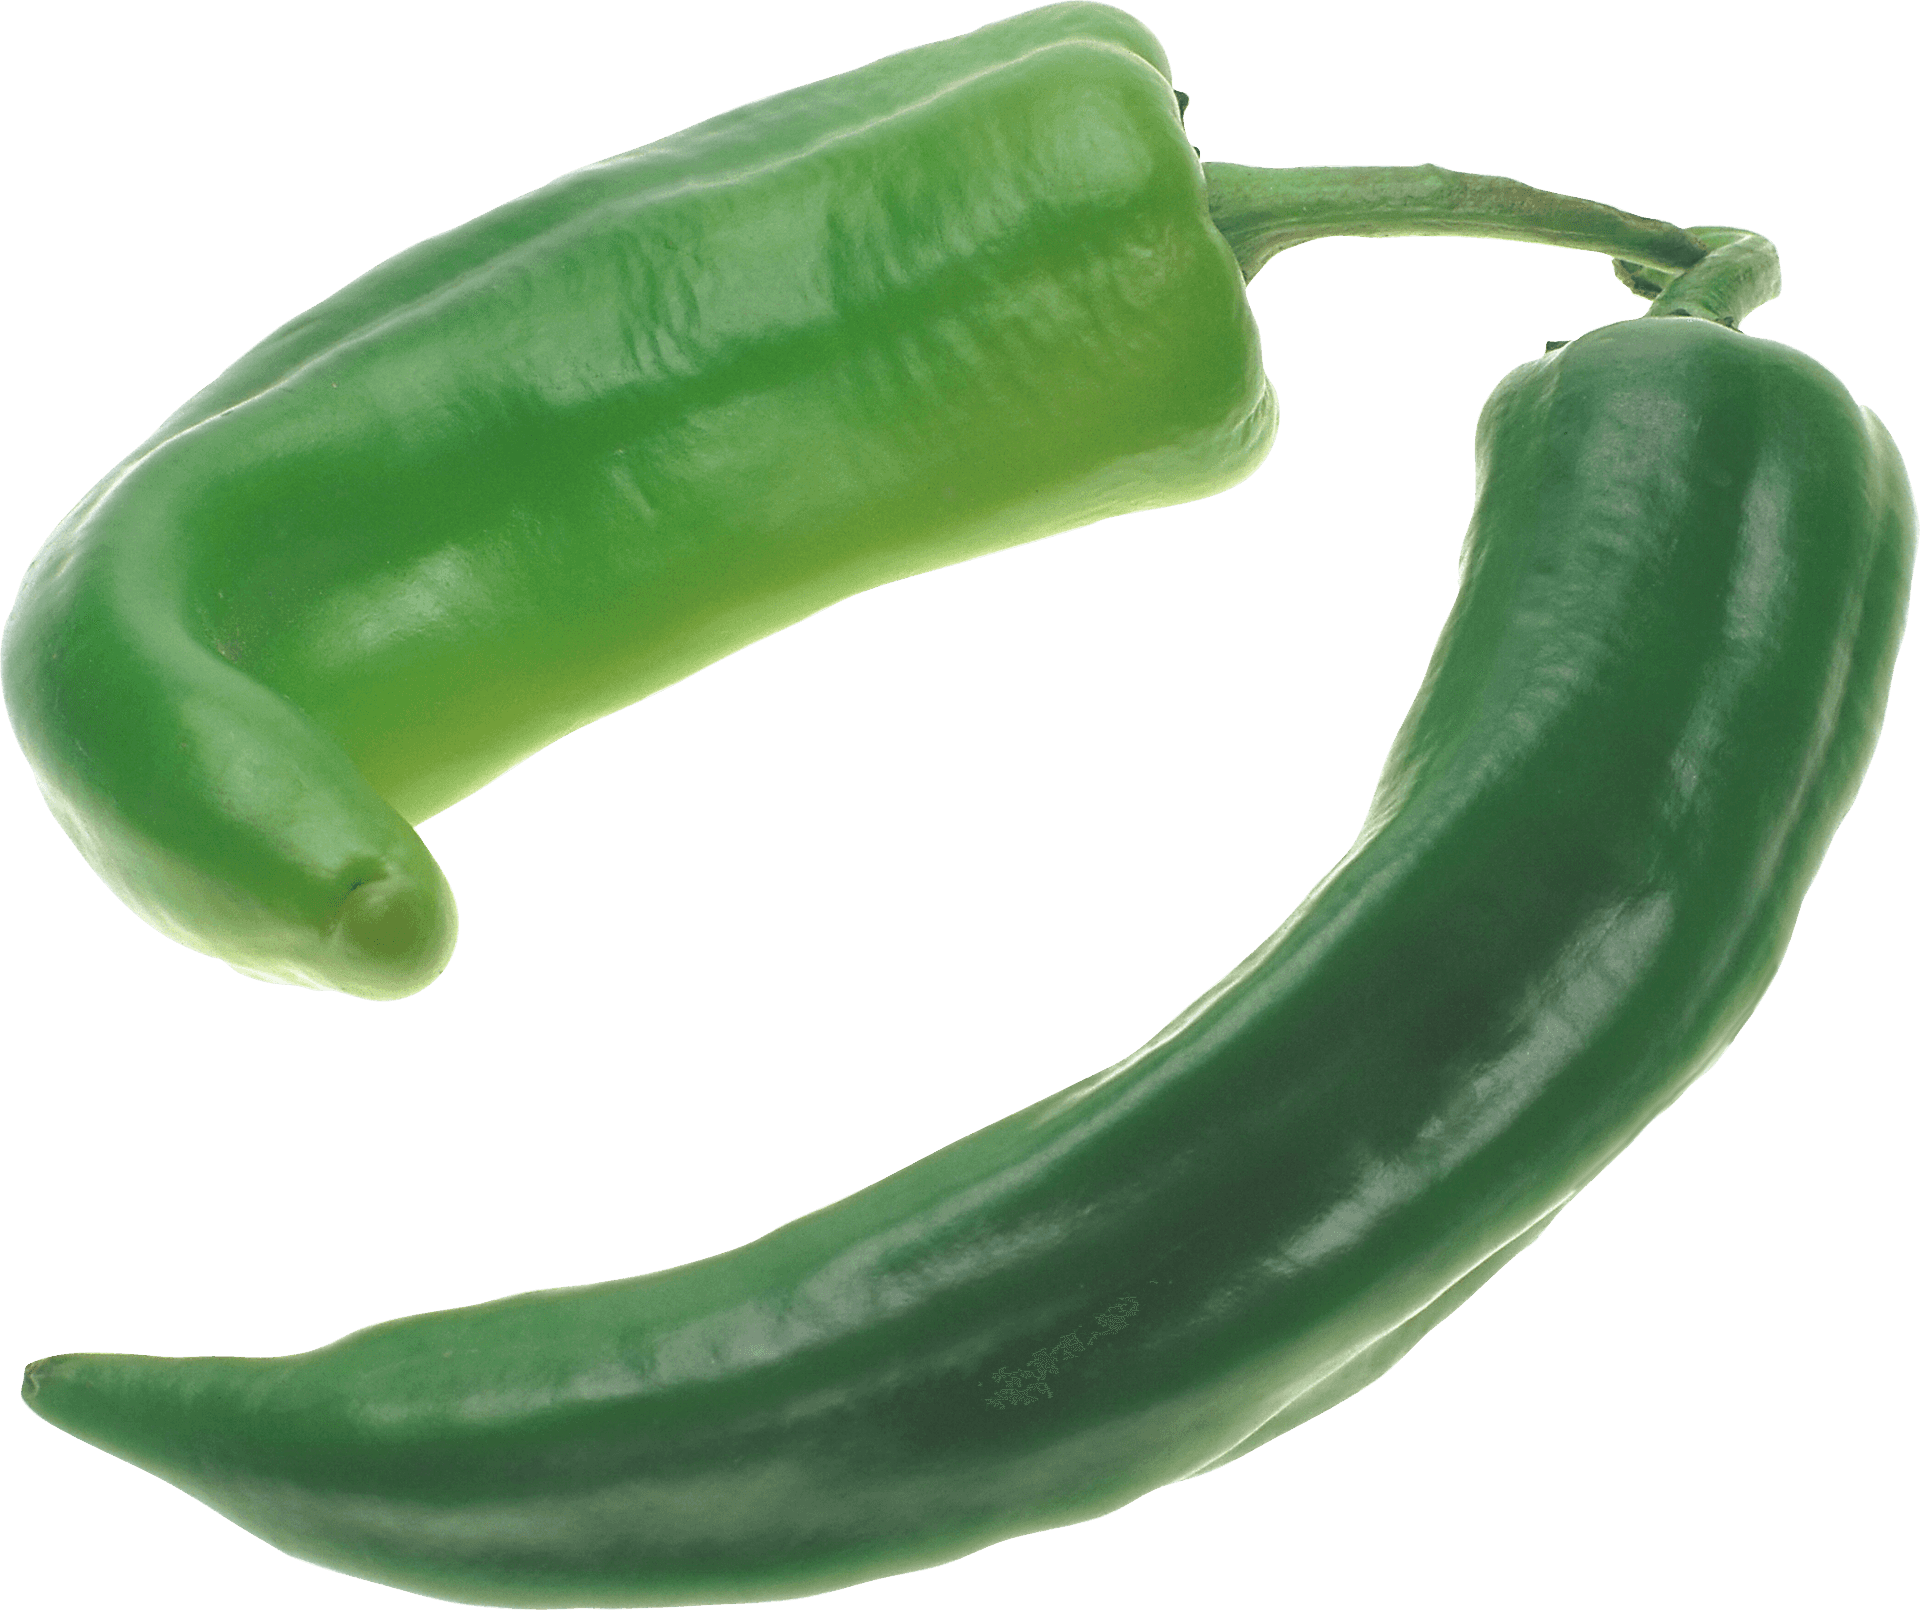 Green Chili Peppers Transparent Background PNG